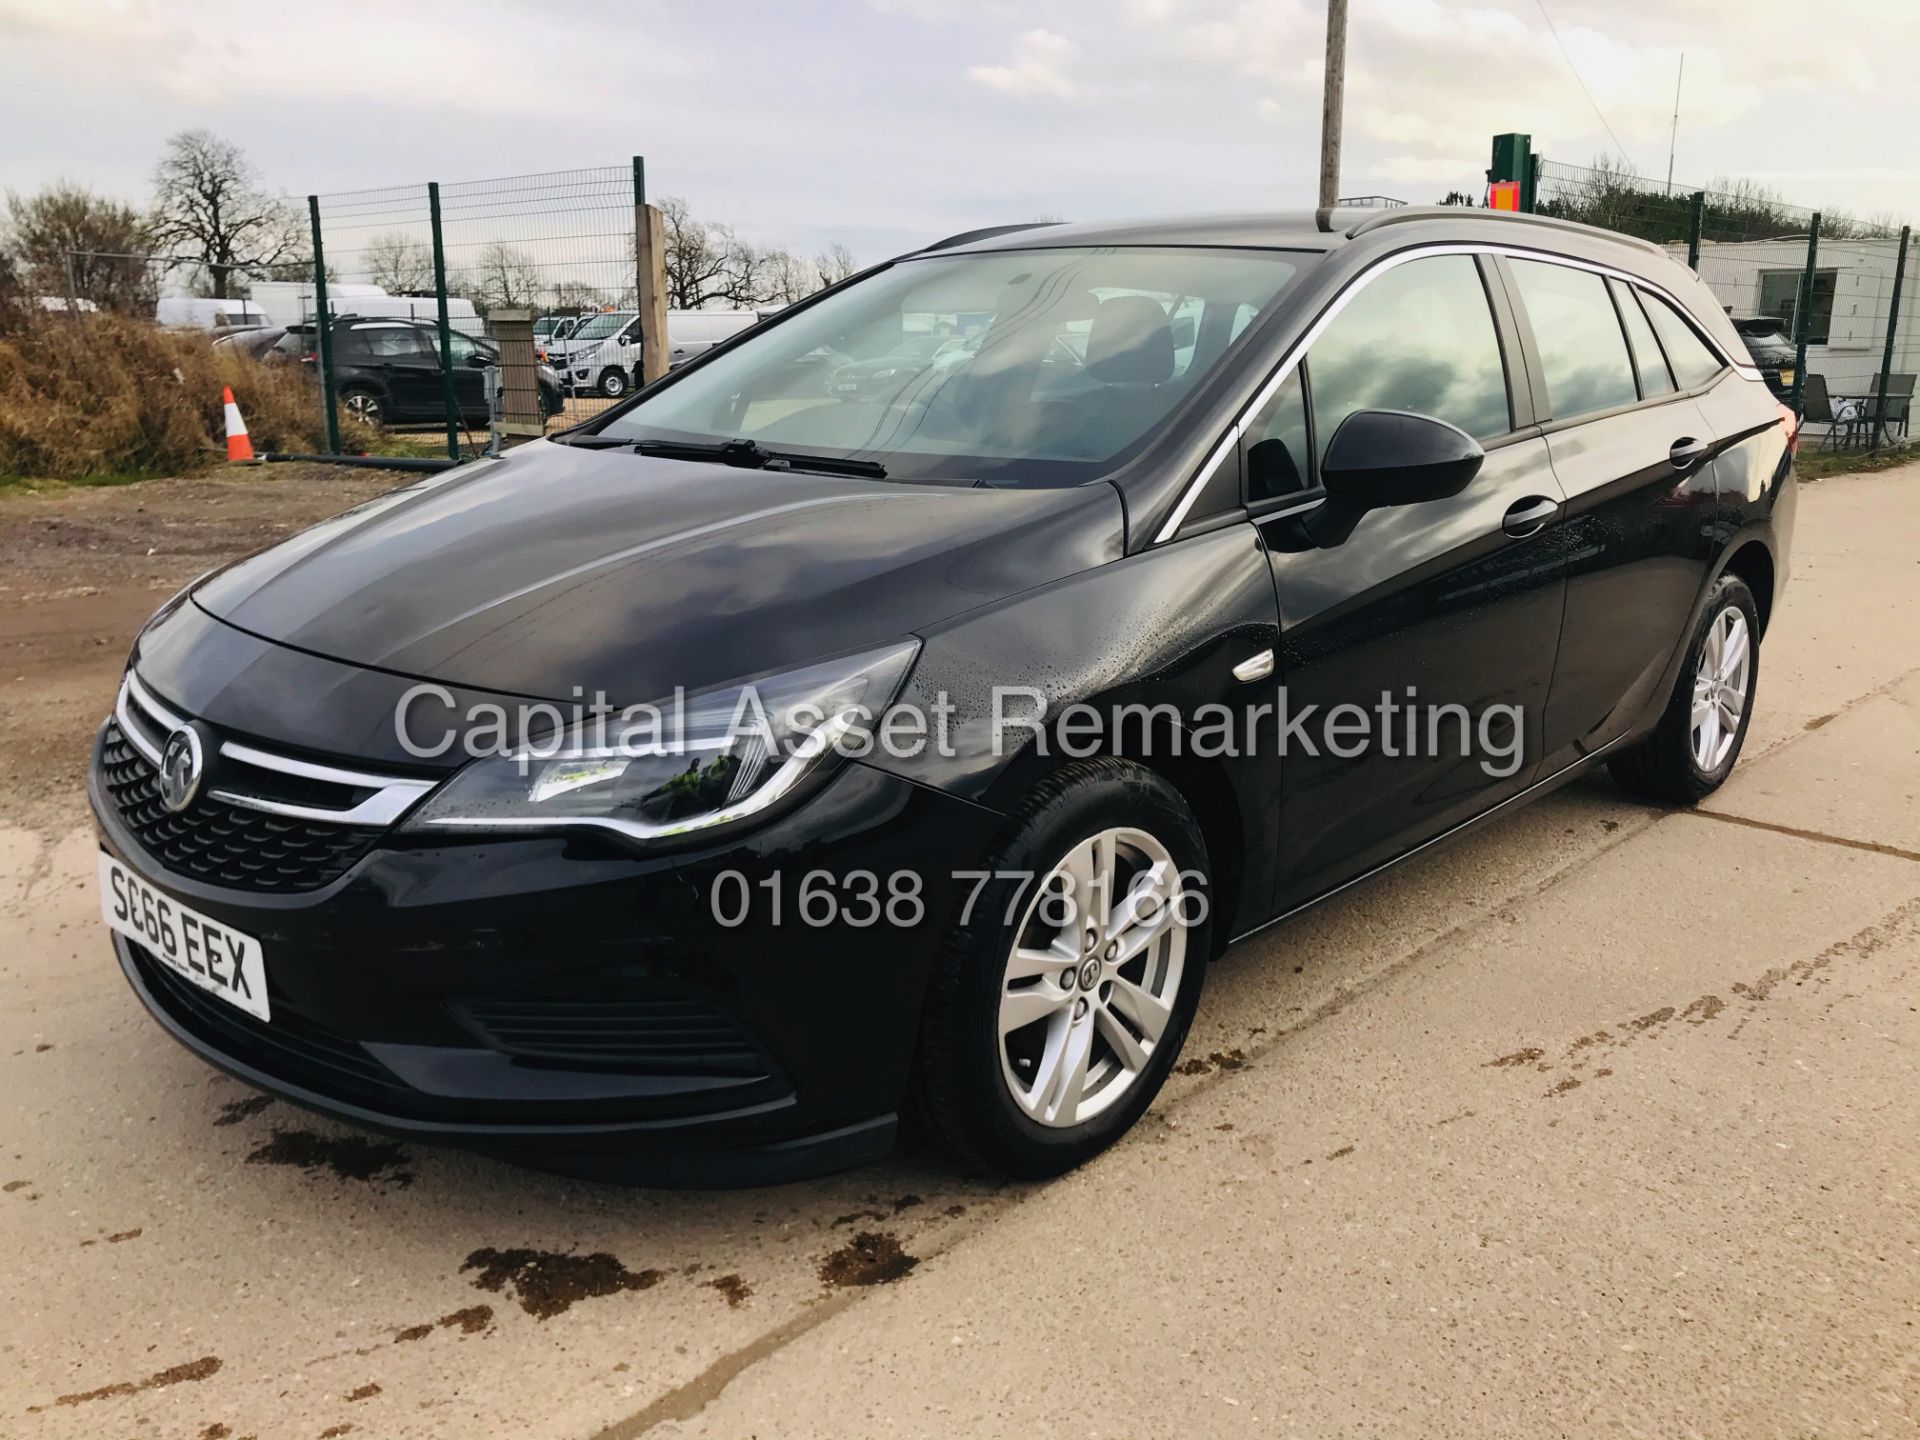 (ON SALE) VAUXHALL ASTRA 1.6CDTI "DESIGN ECOFLEX" 1 OWNER - AC - ELEC PACK - ALLOYS - Image 5 of 25